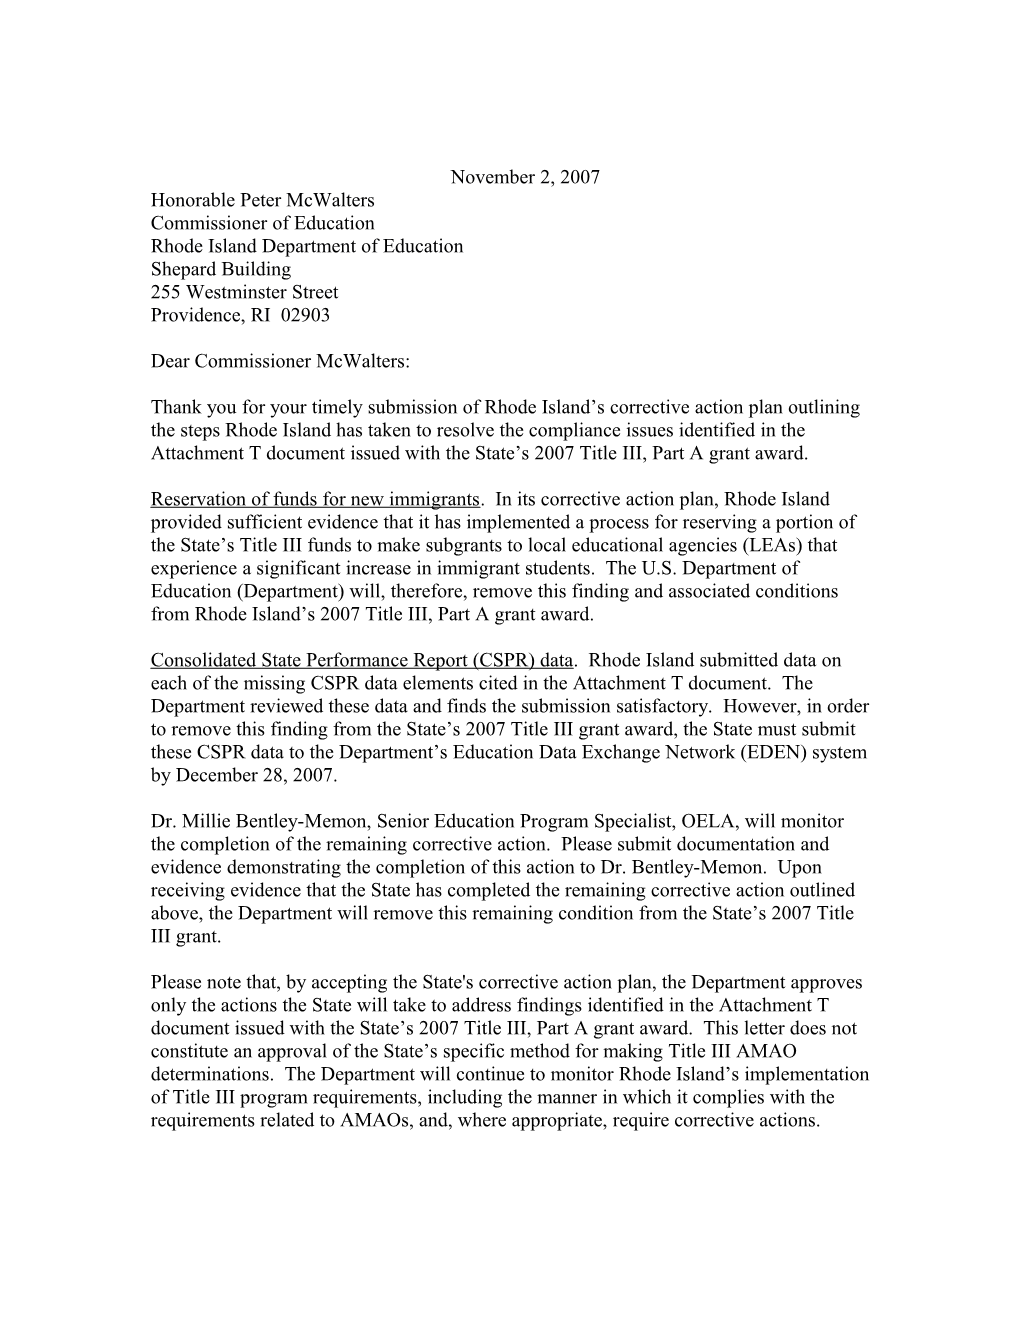 Letter Regarding the Title III, Part a Grant Award Made to Rhode Island MS Word